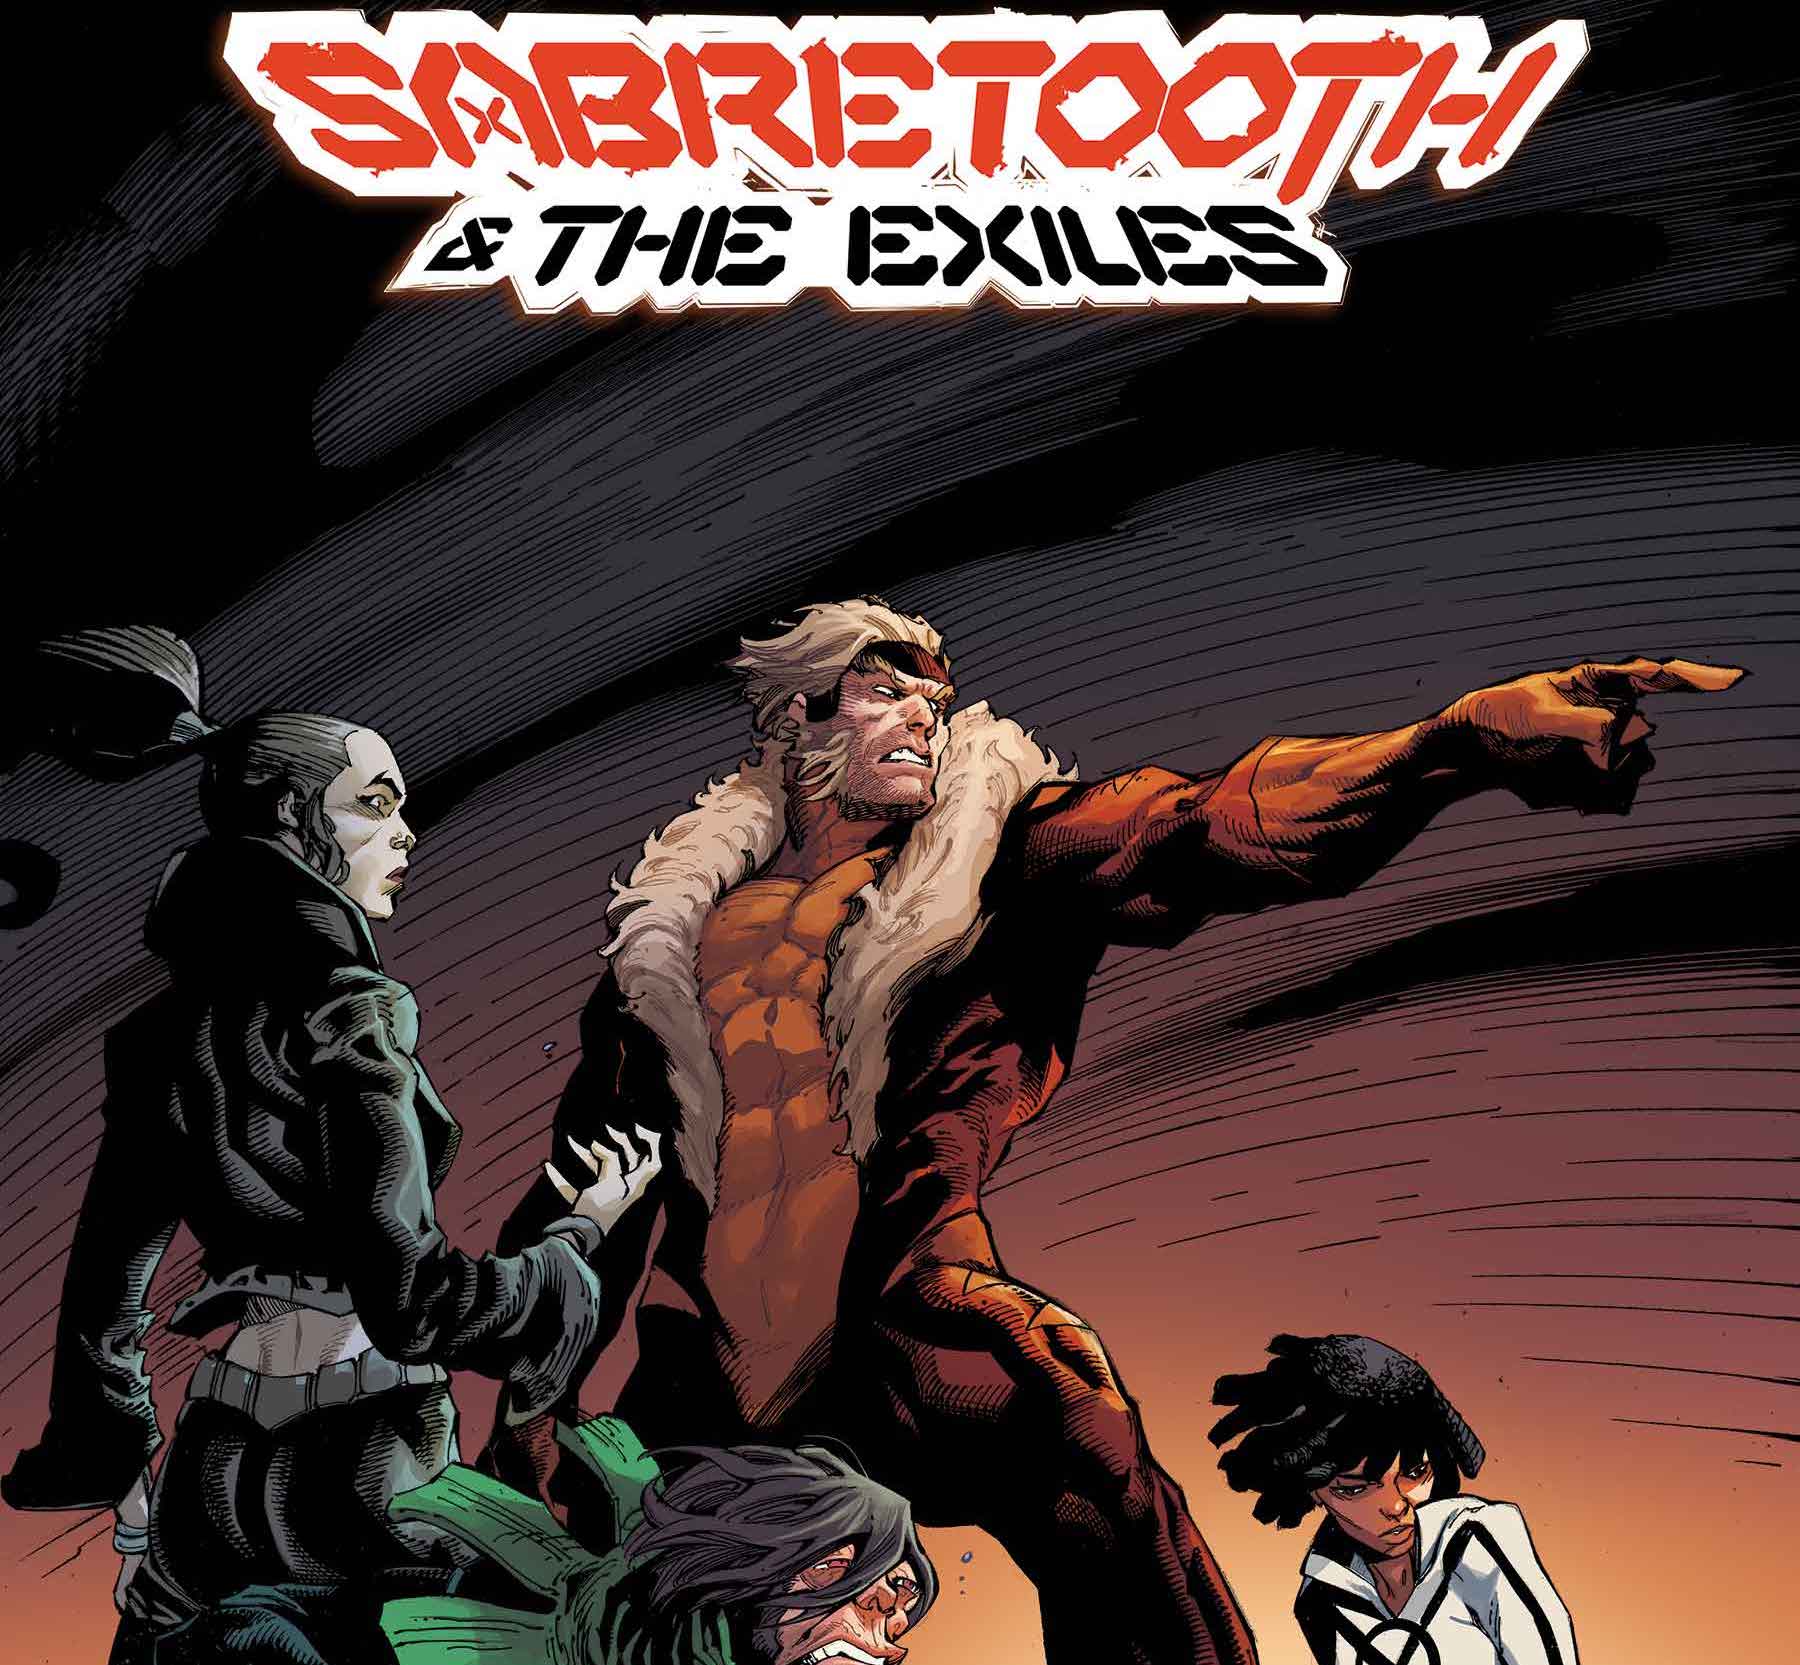 EXCLUSIVE Marvel Preview: Sabretooth & the Exiles #2